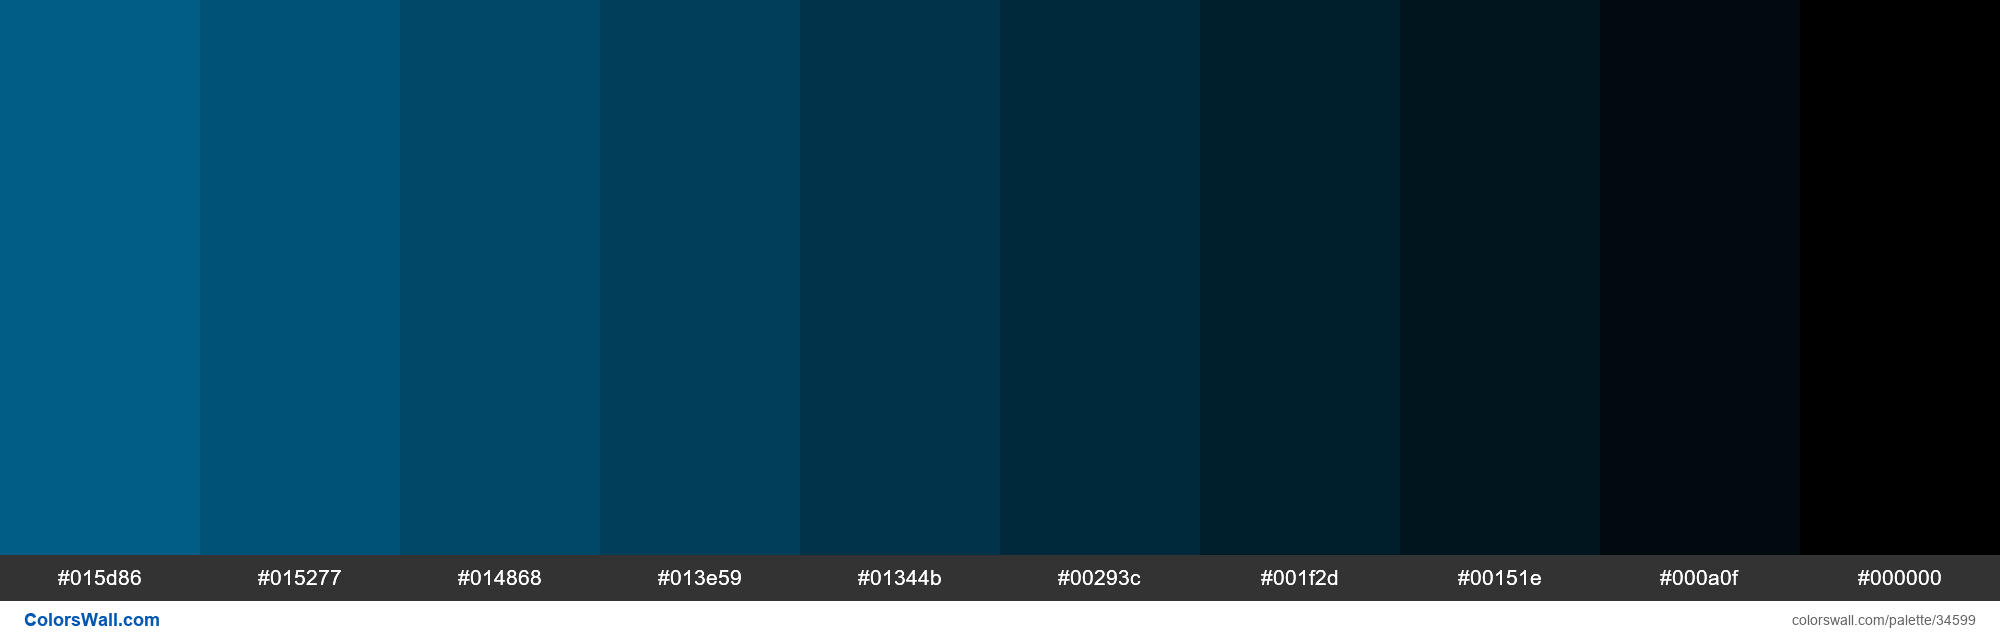 Shades XKCD Color peacock blue #016795 hex colors palette - ColorsWall